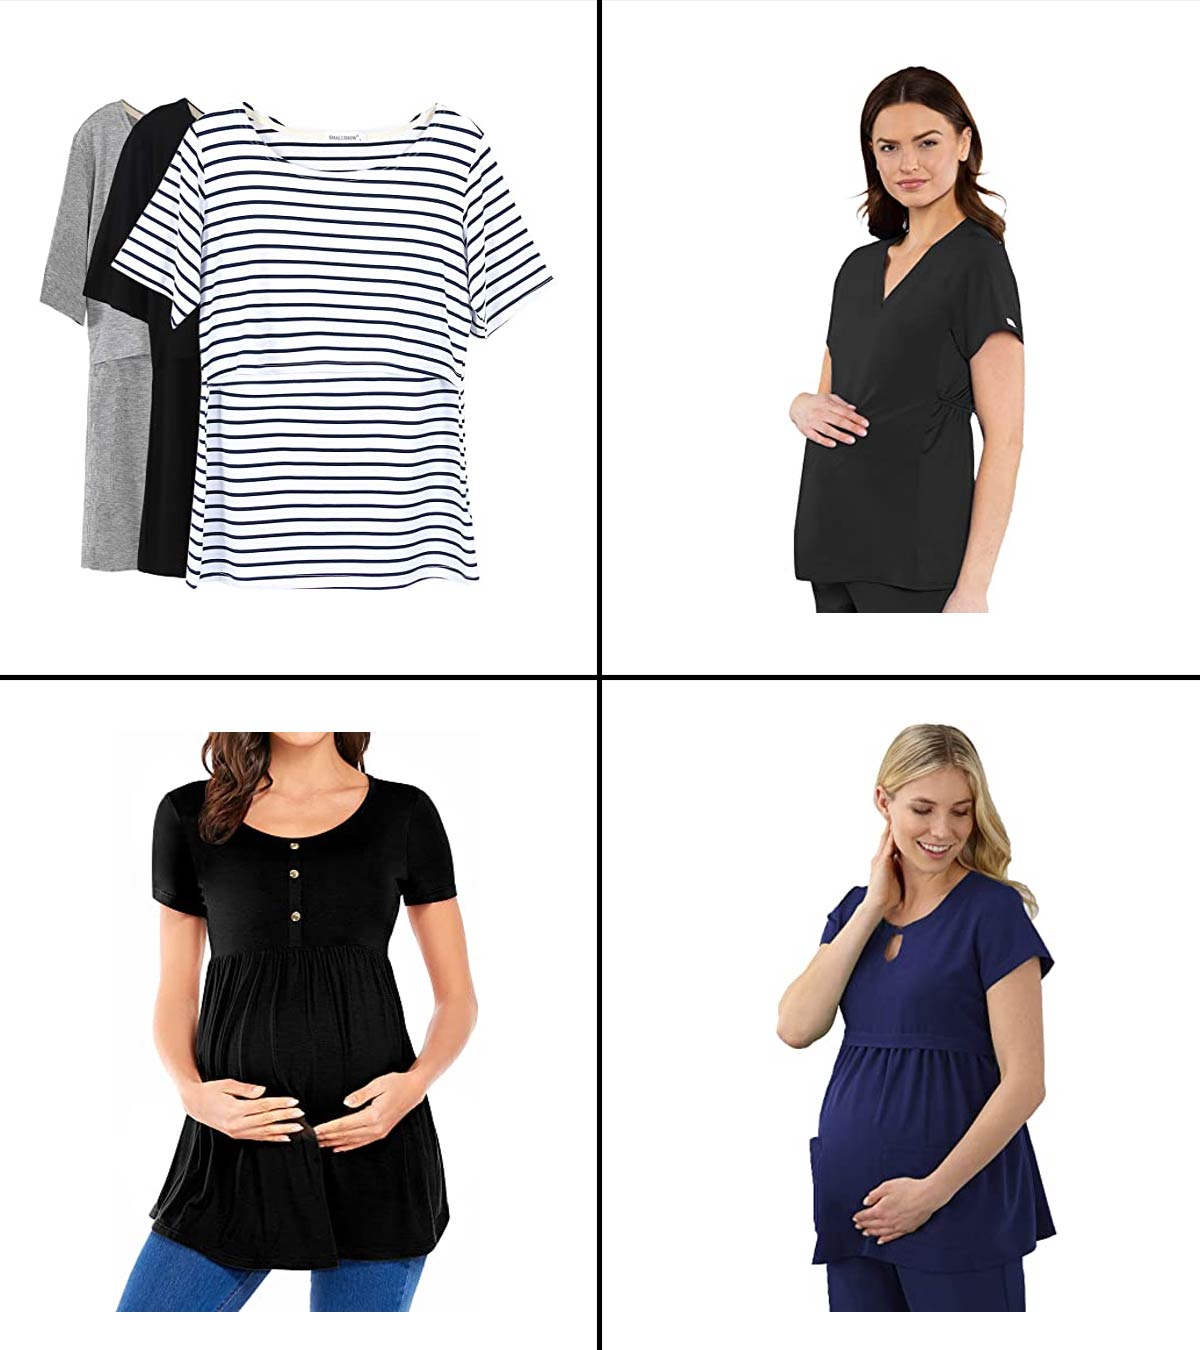 My Bump Women's Maternity Front Pleat Short Sleeve Casual Top Made in USA 